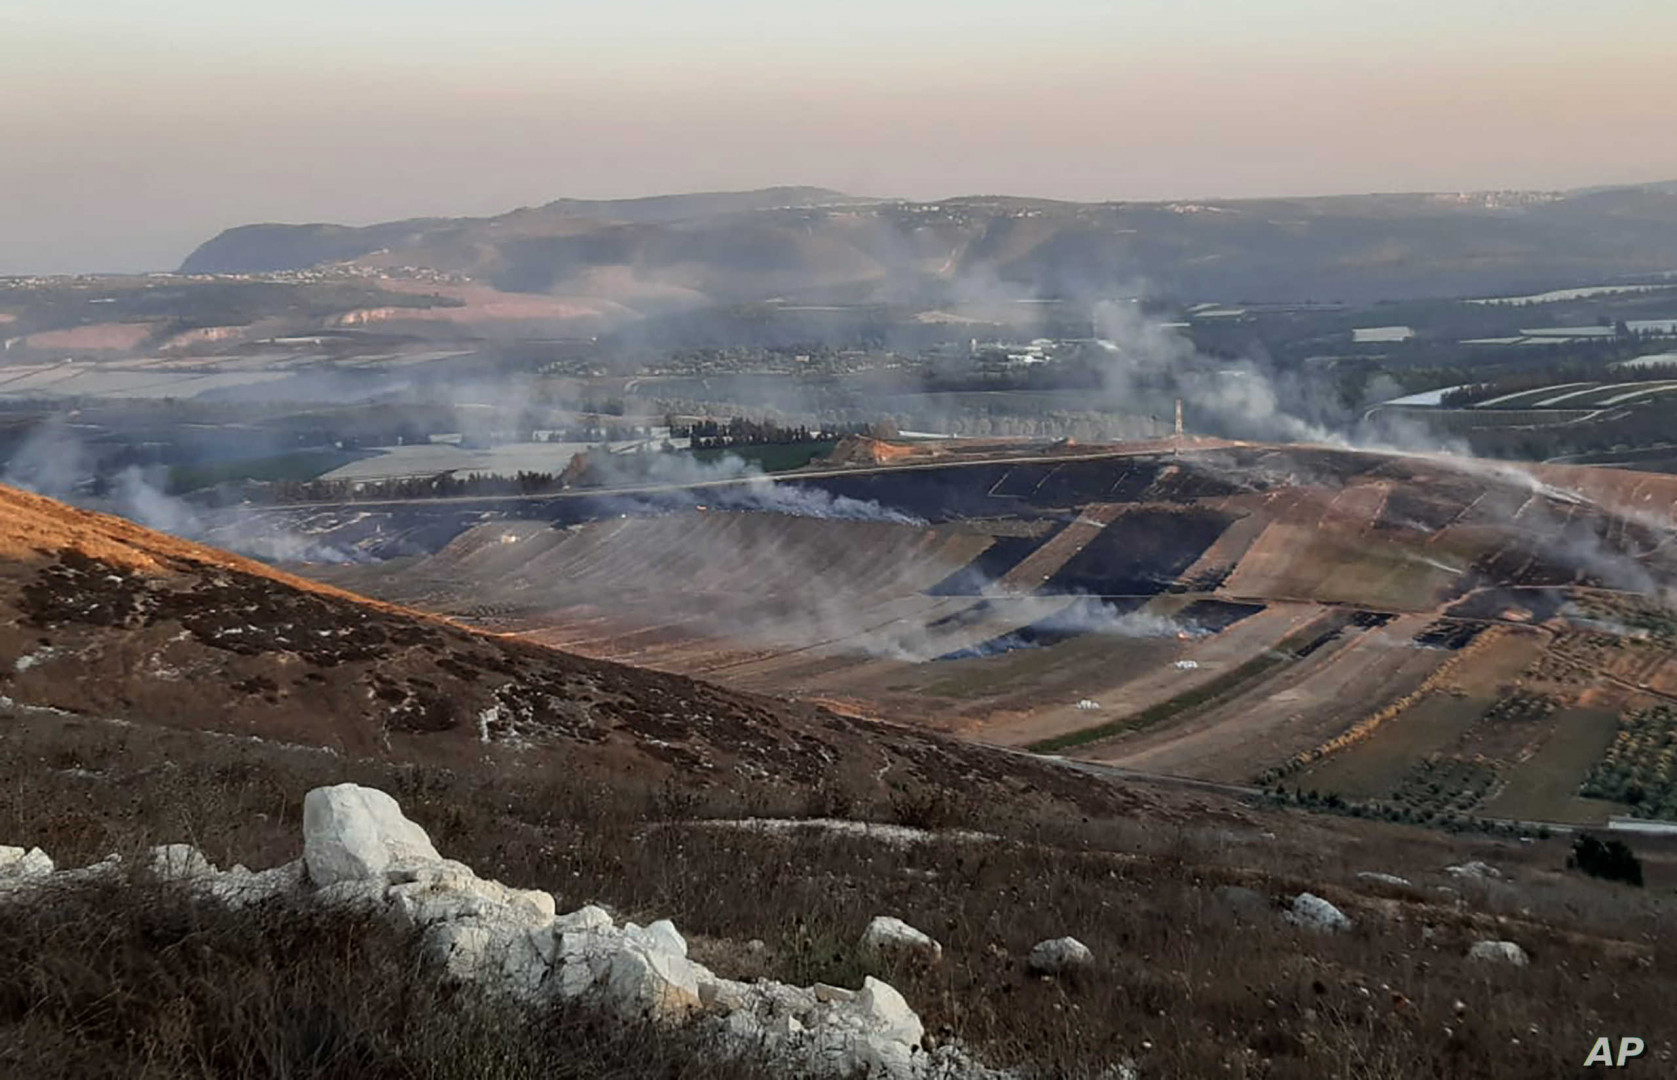 Israel shells Lebanon in response to a rocket attack